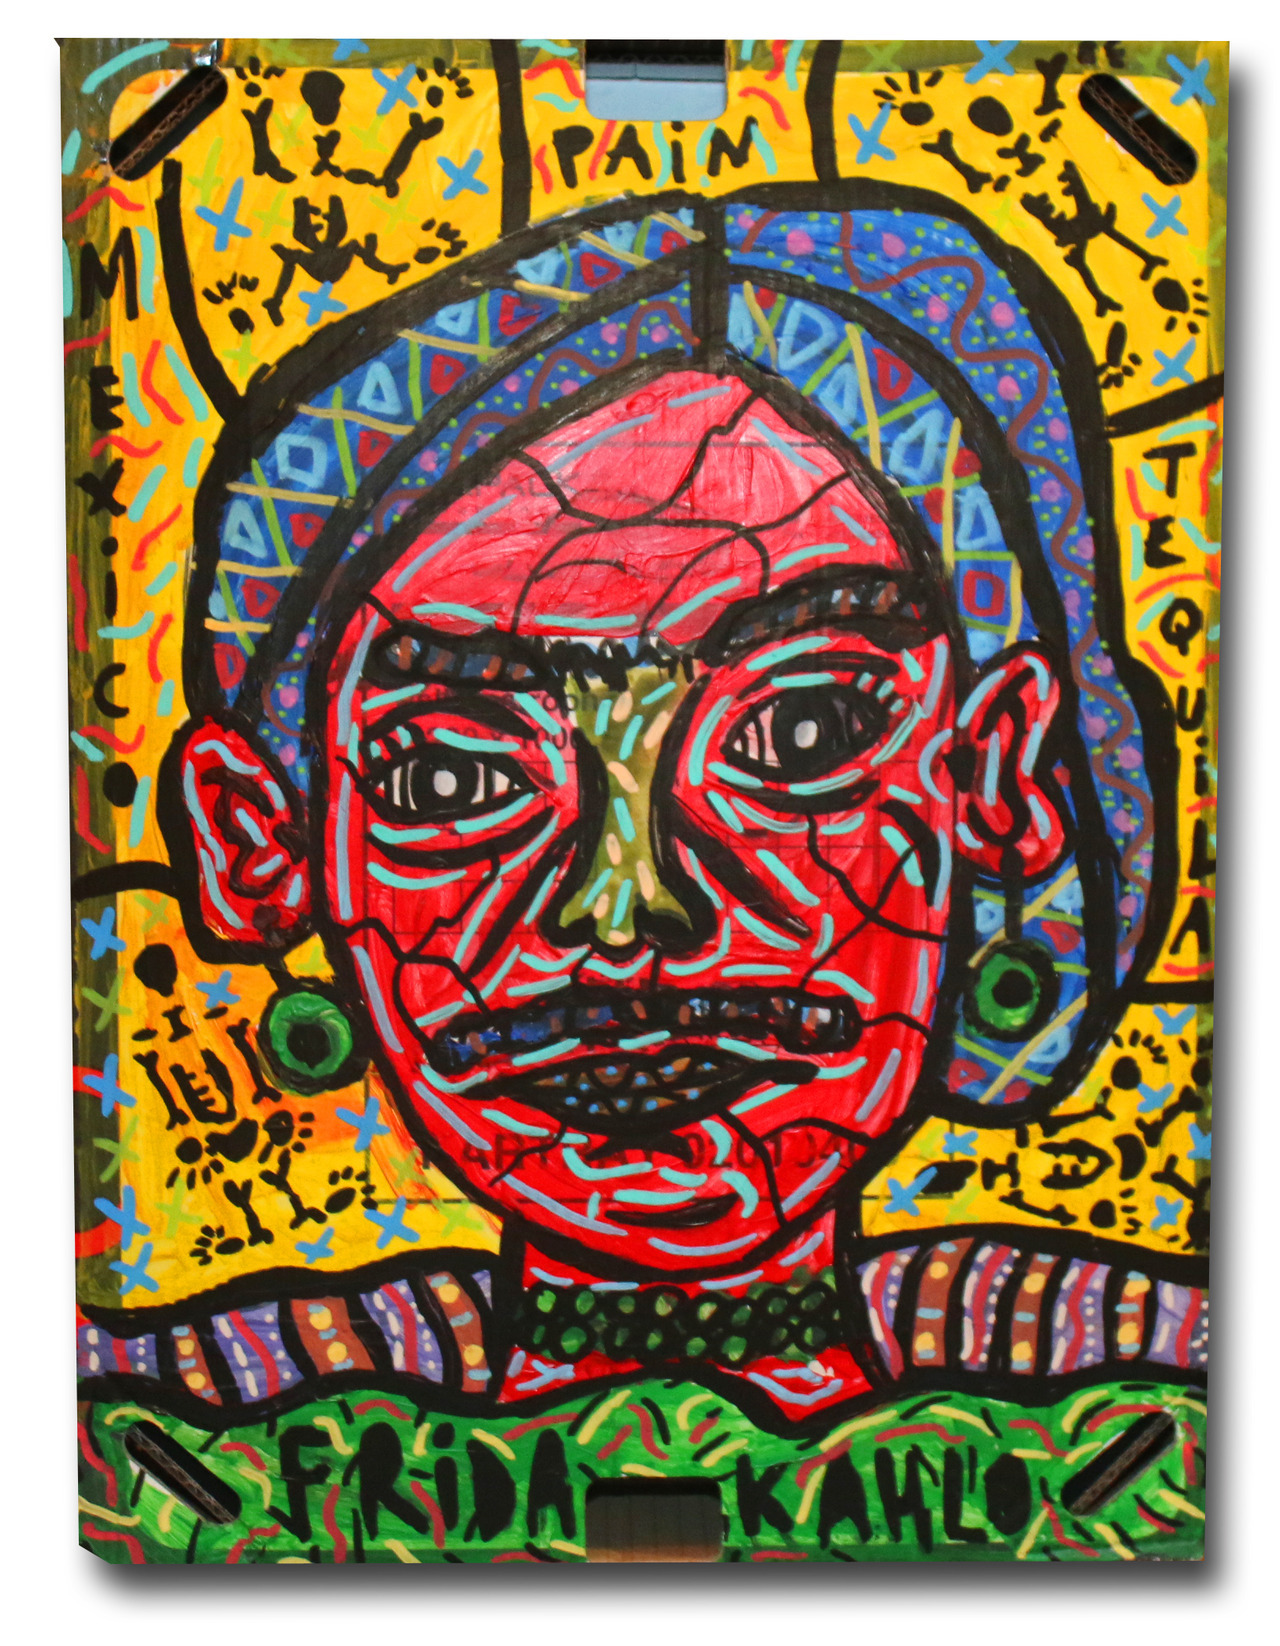    “Little Frida Kahlo” , 2018   Acrylic paint and Posca marker on cardboard, 20 x 40 cm Private Collection 